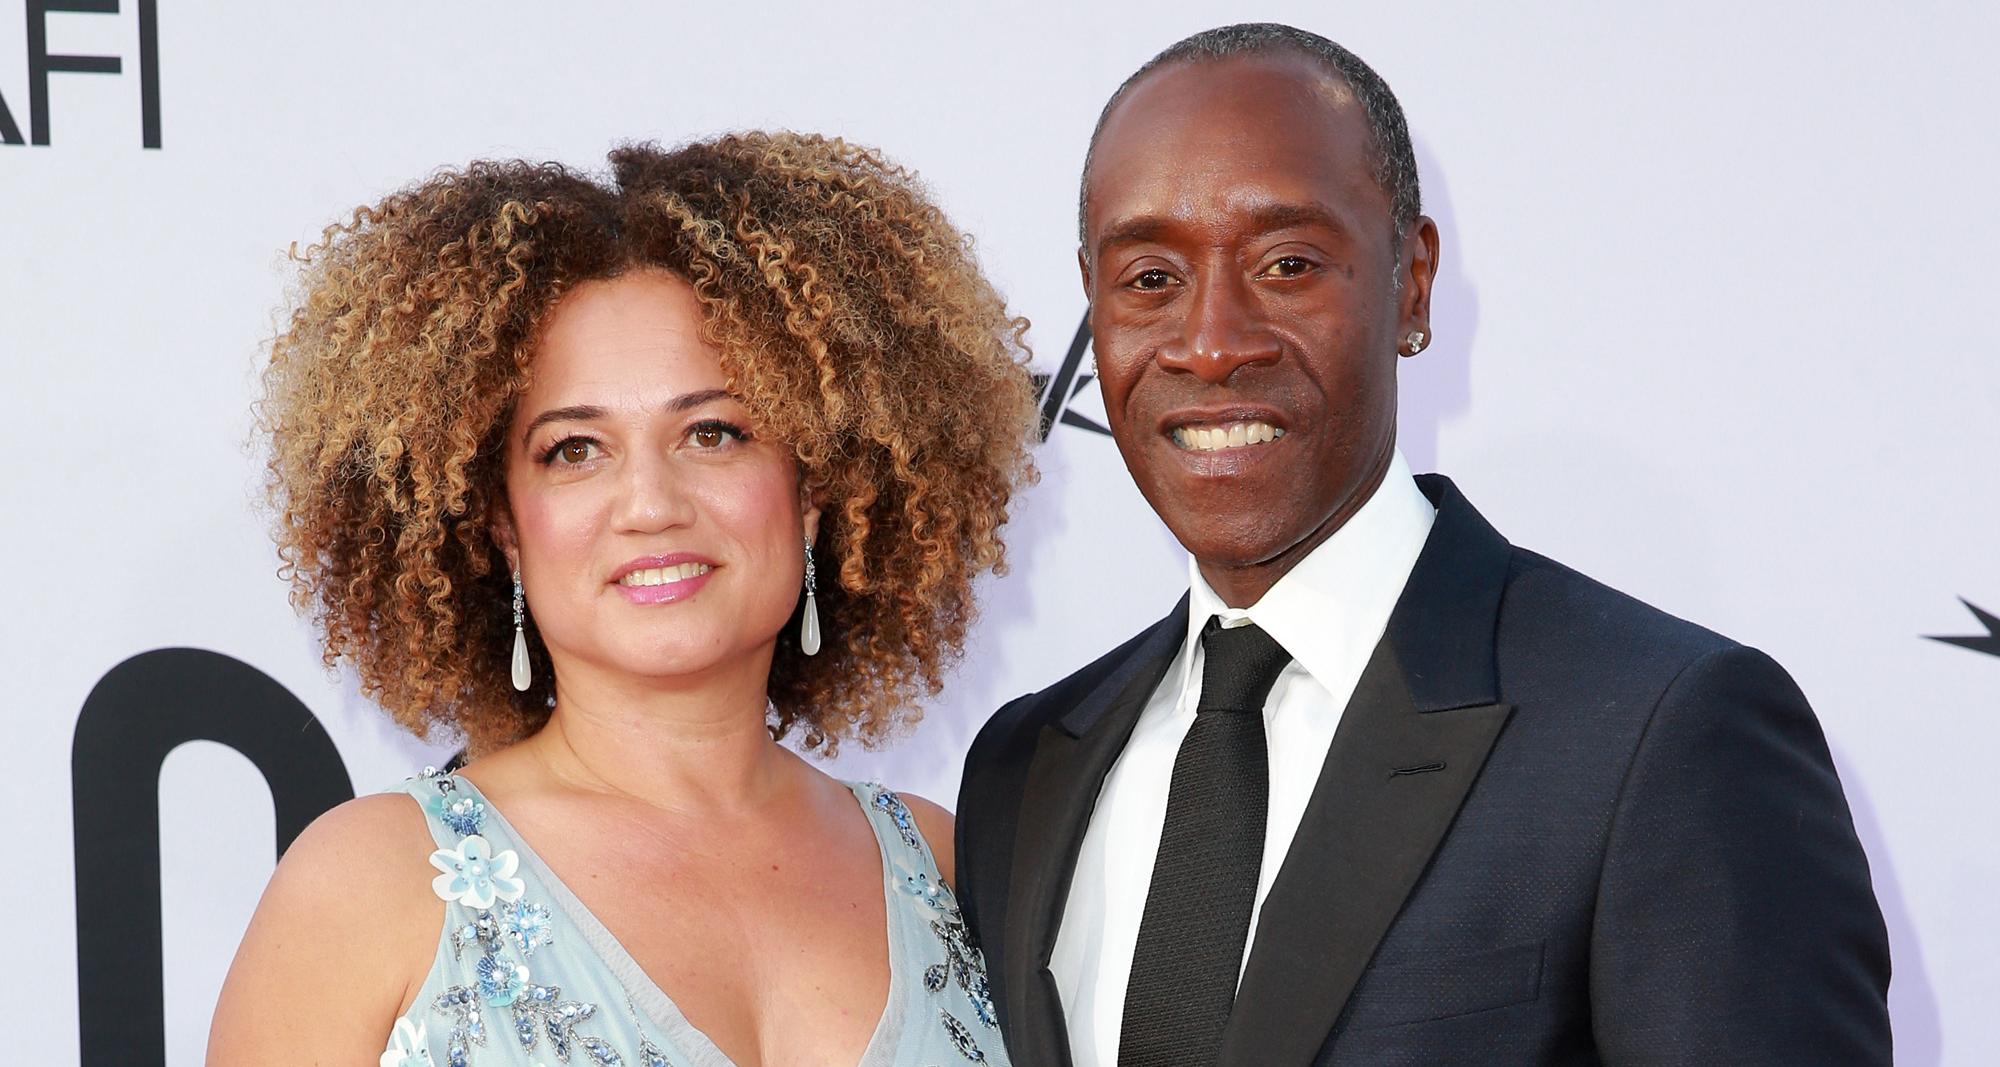 Don Cheadle Reveals He Had a Pandemic Wedding